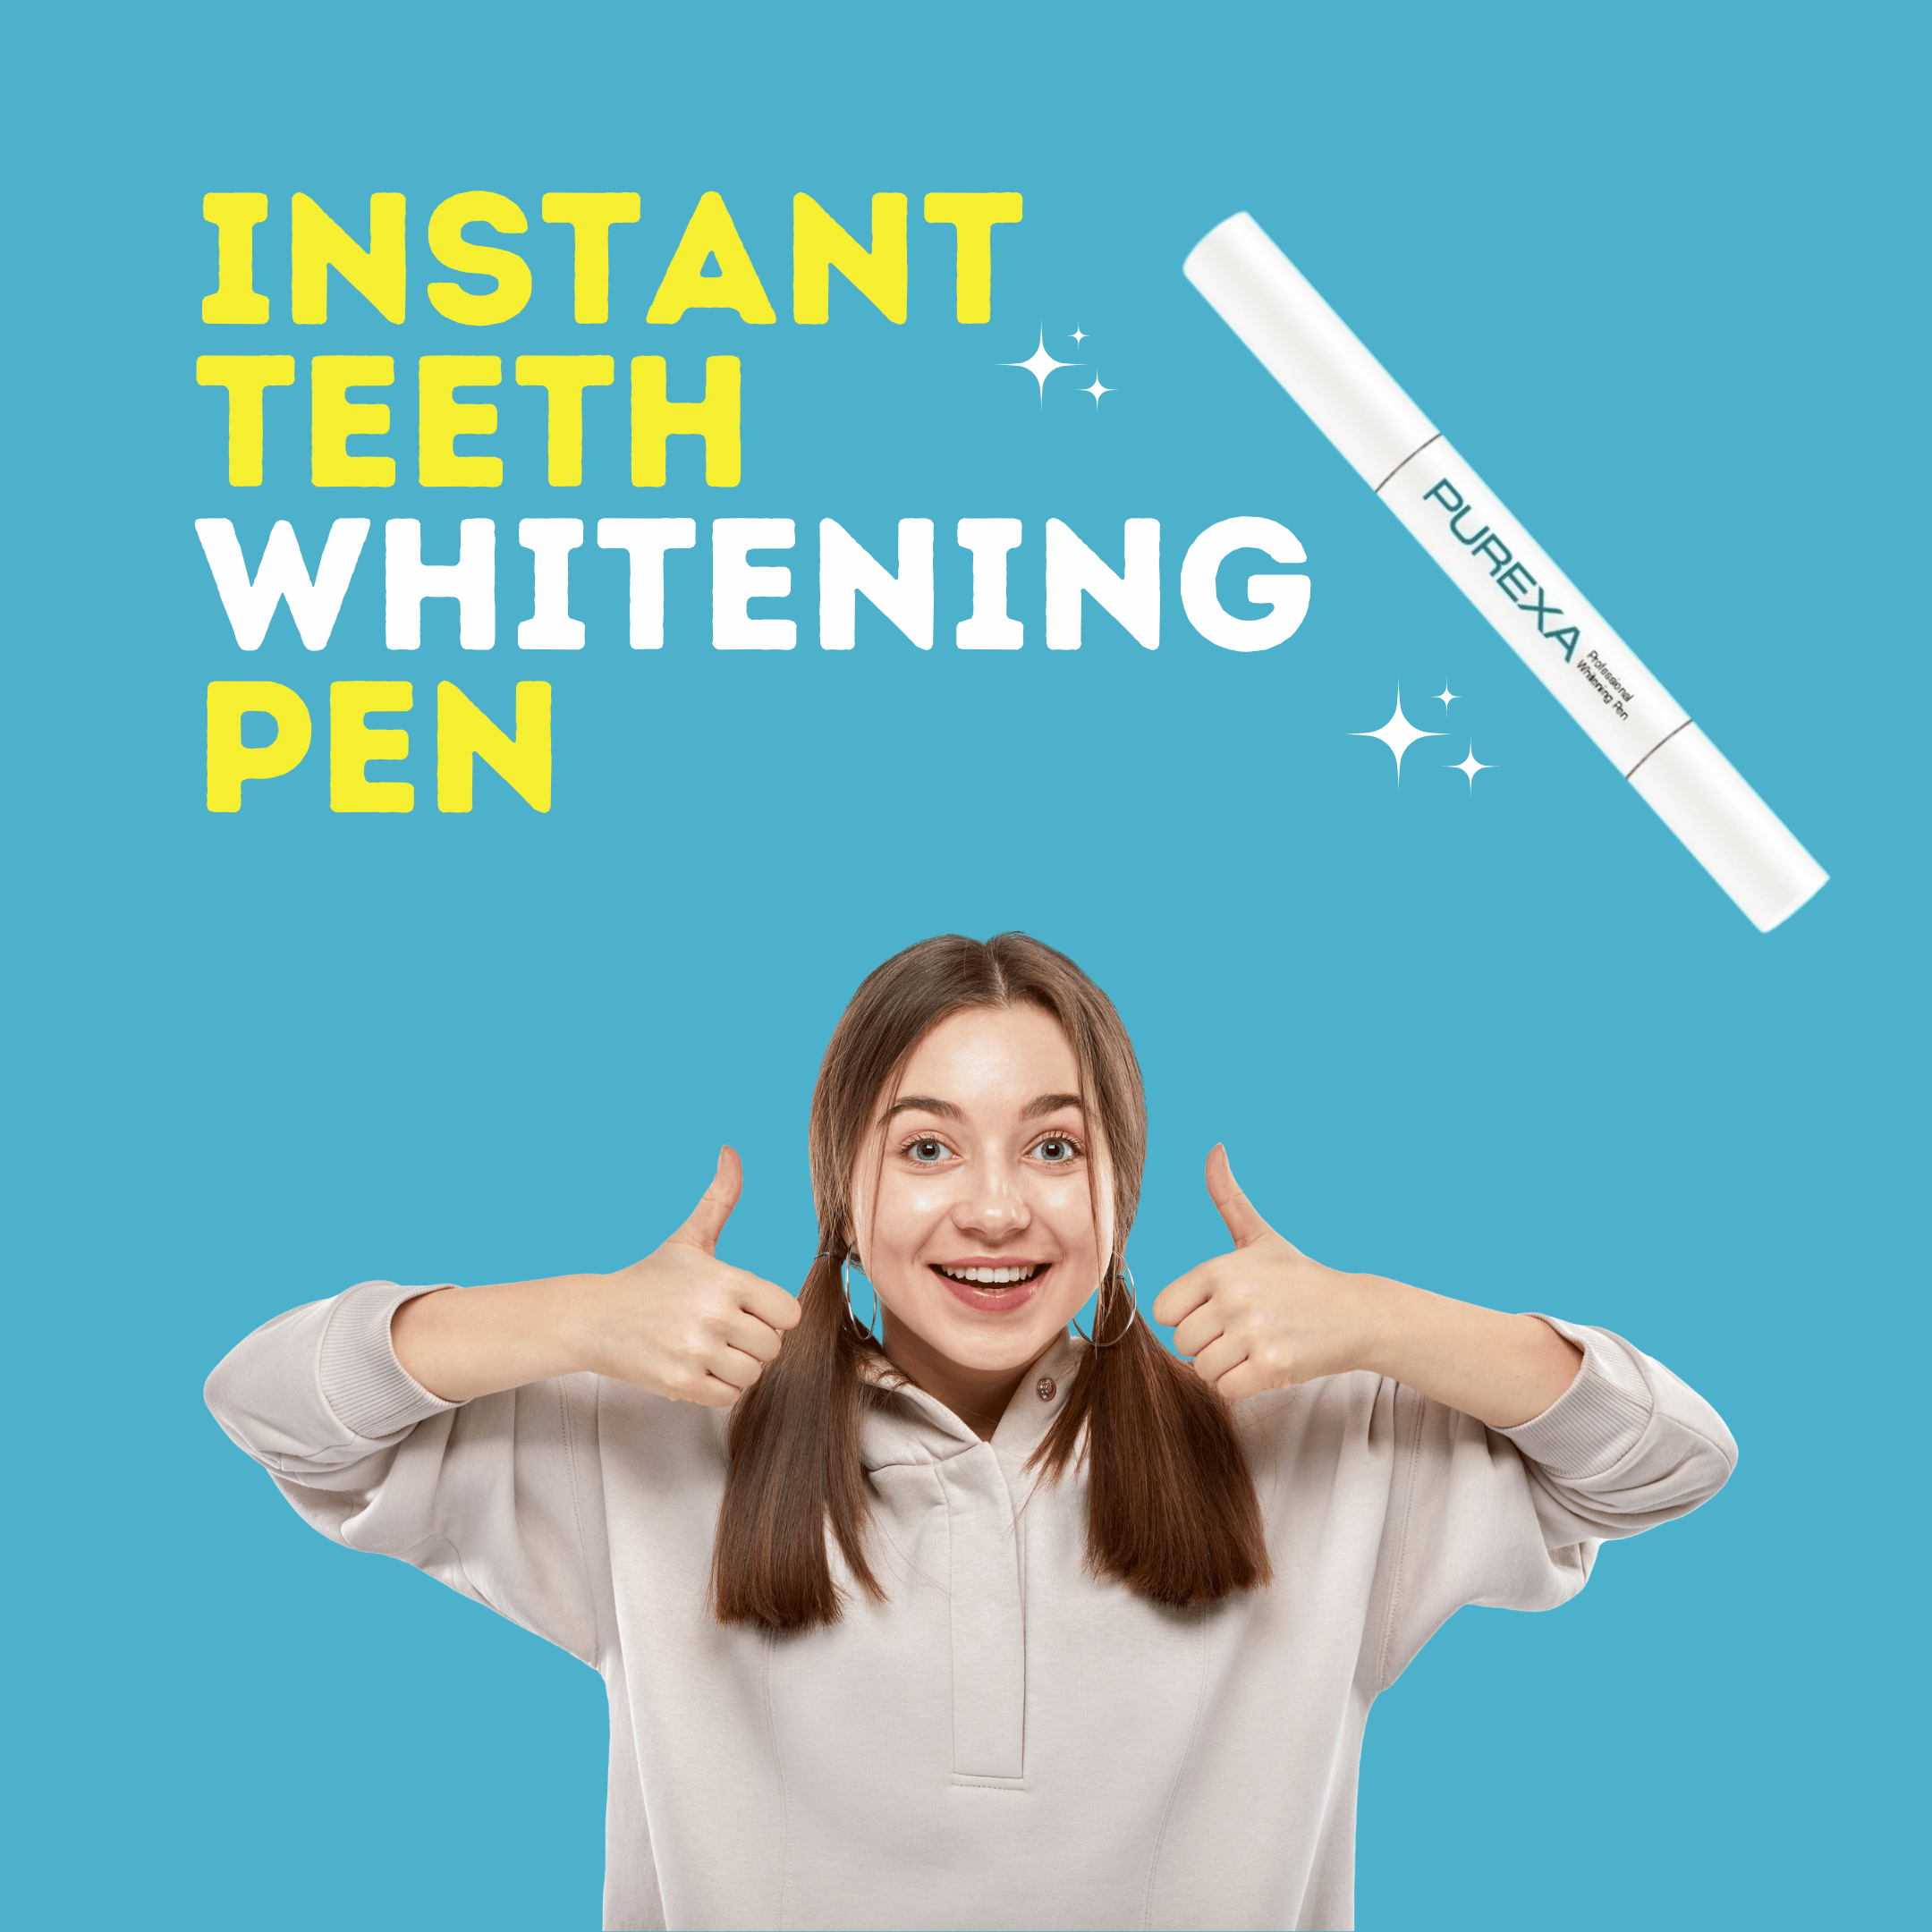 Image Shows a happy girl with PUREXA Teeth Whitening Pen and Text written on image is instant teeth whitening pen